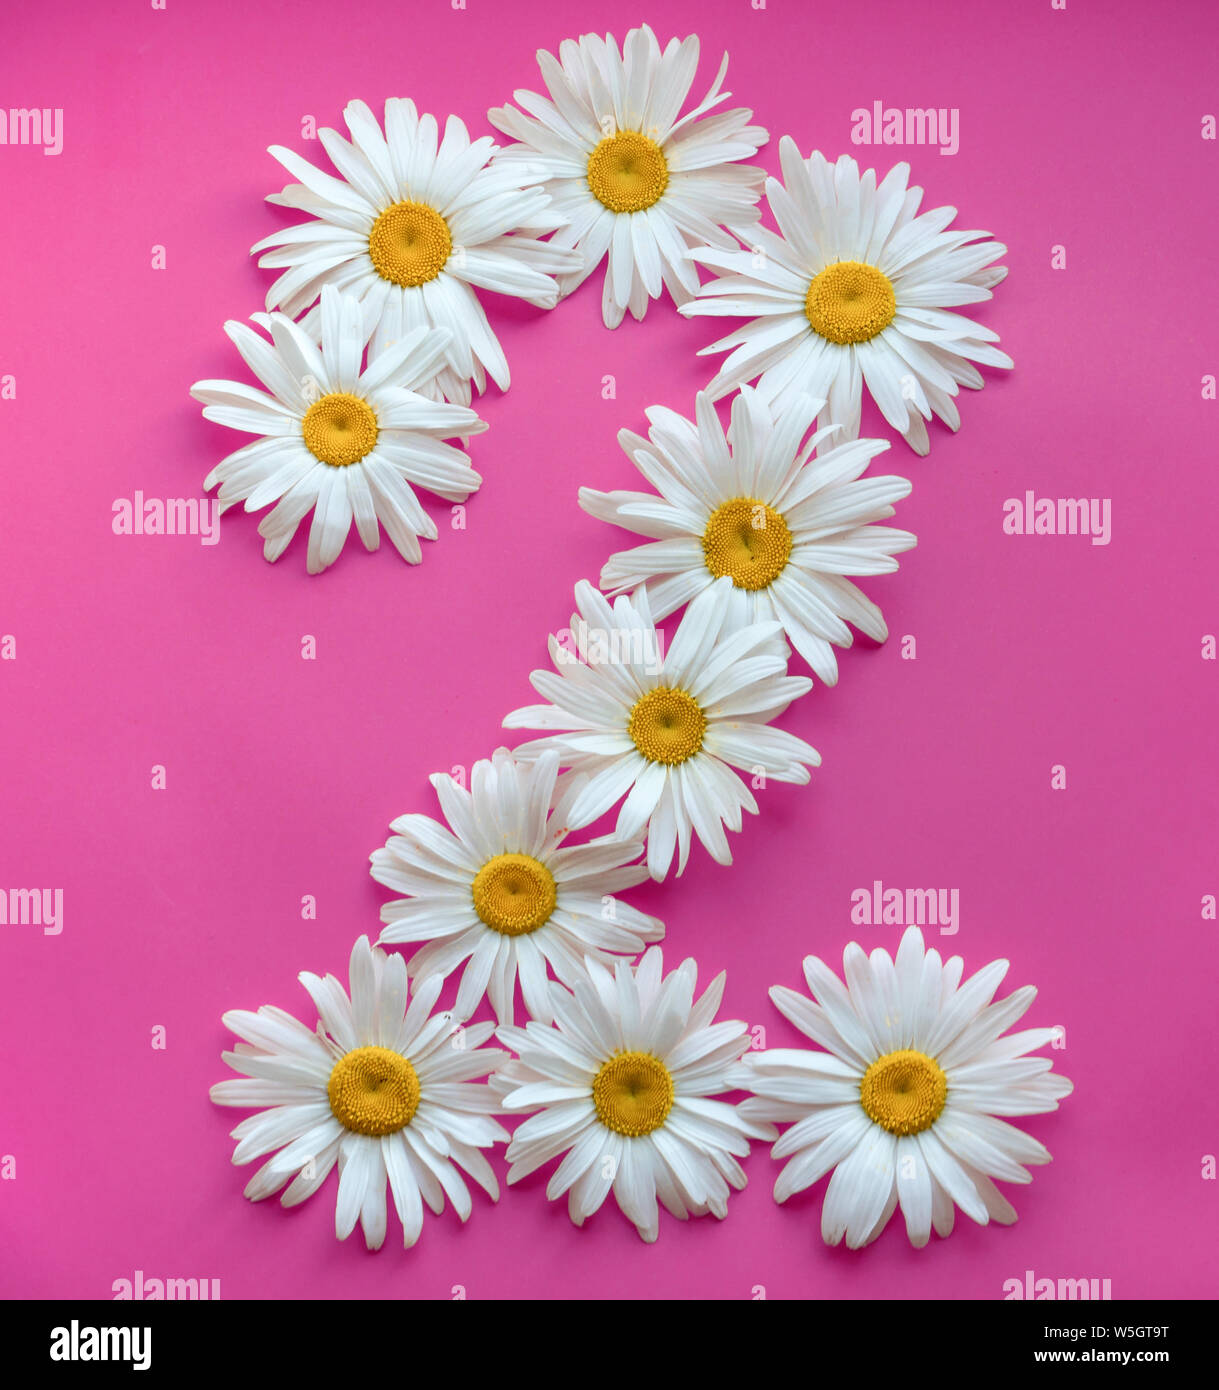 2, arabic numeral. Happy New Year 2020. Large daisies create a ...